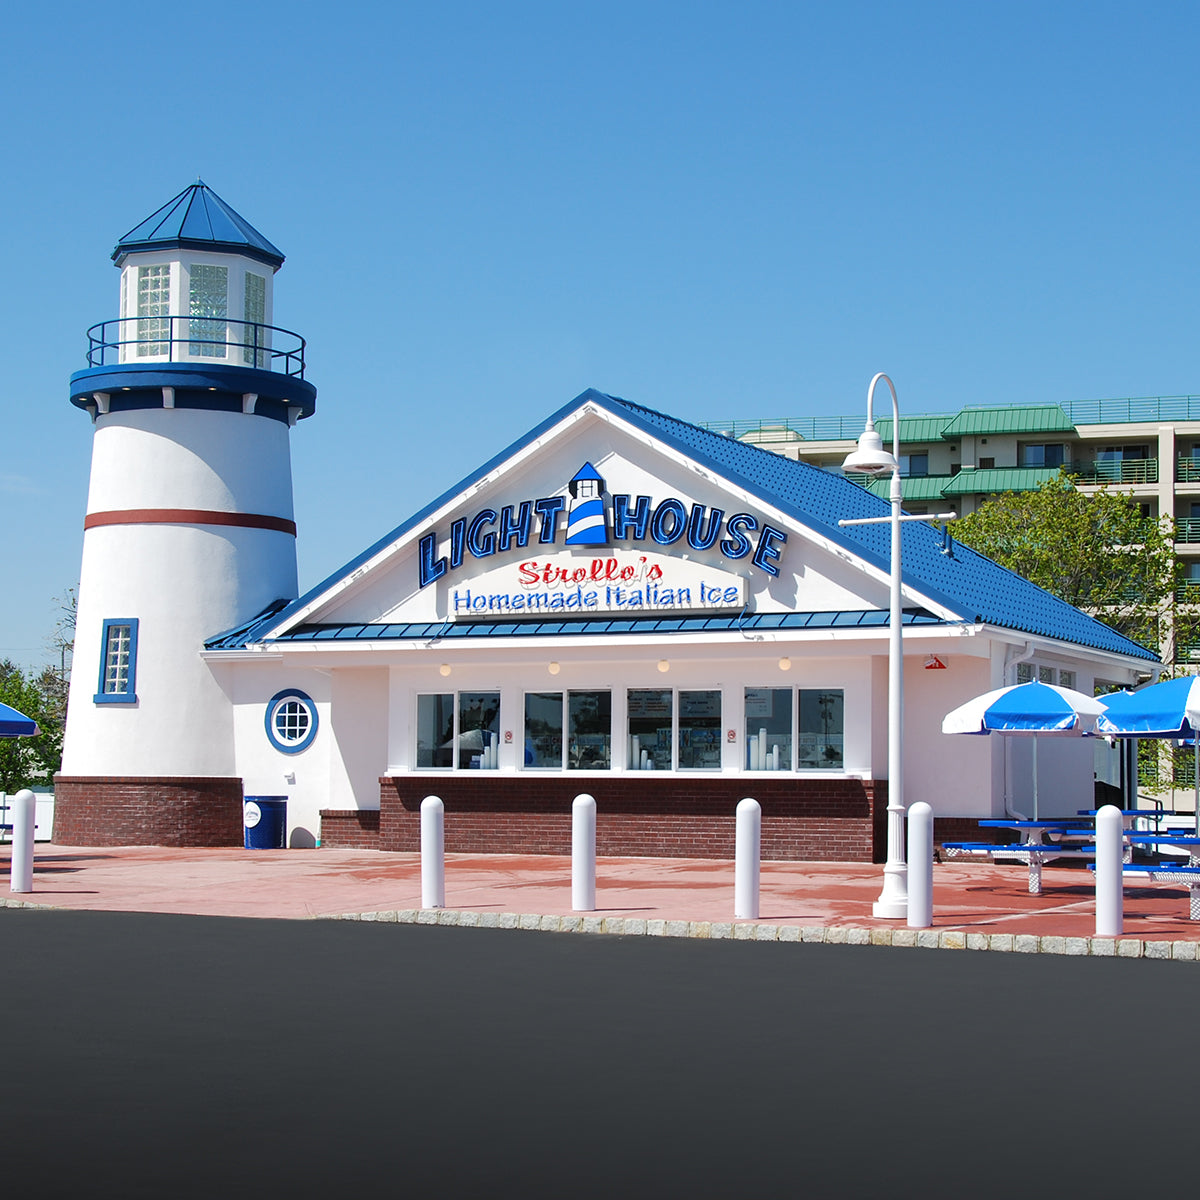 The Strollo's Lighthouse Long Branch location